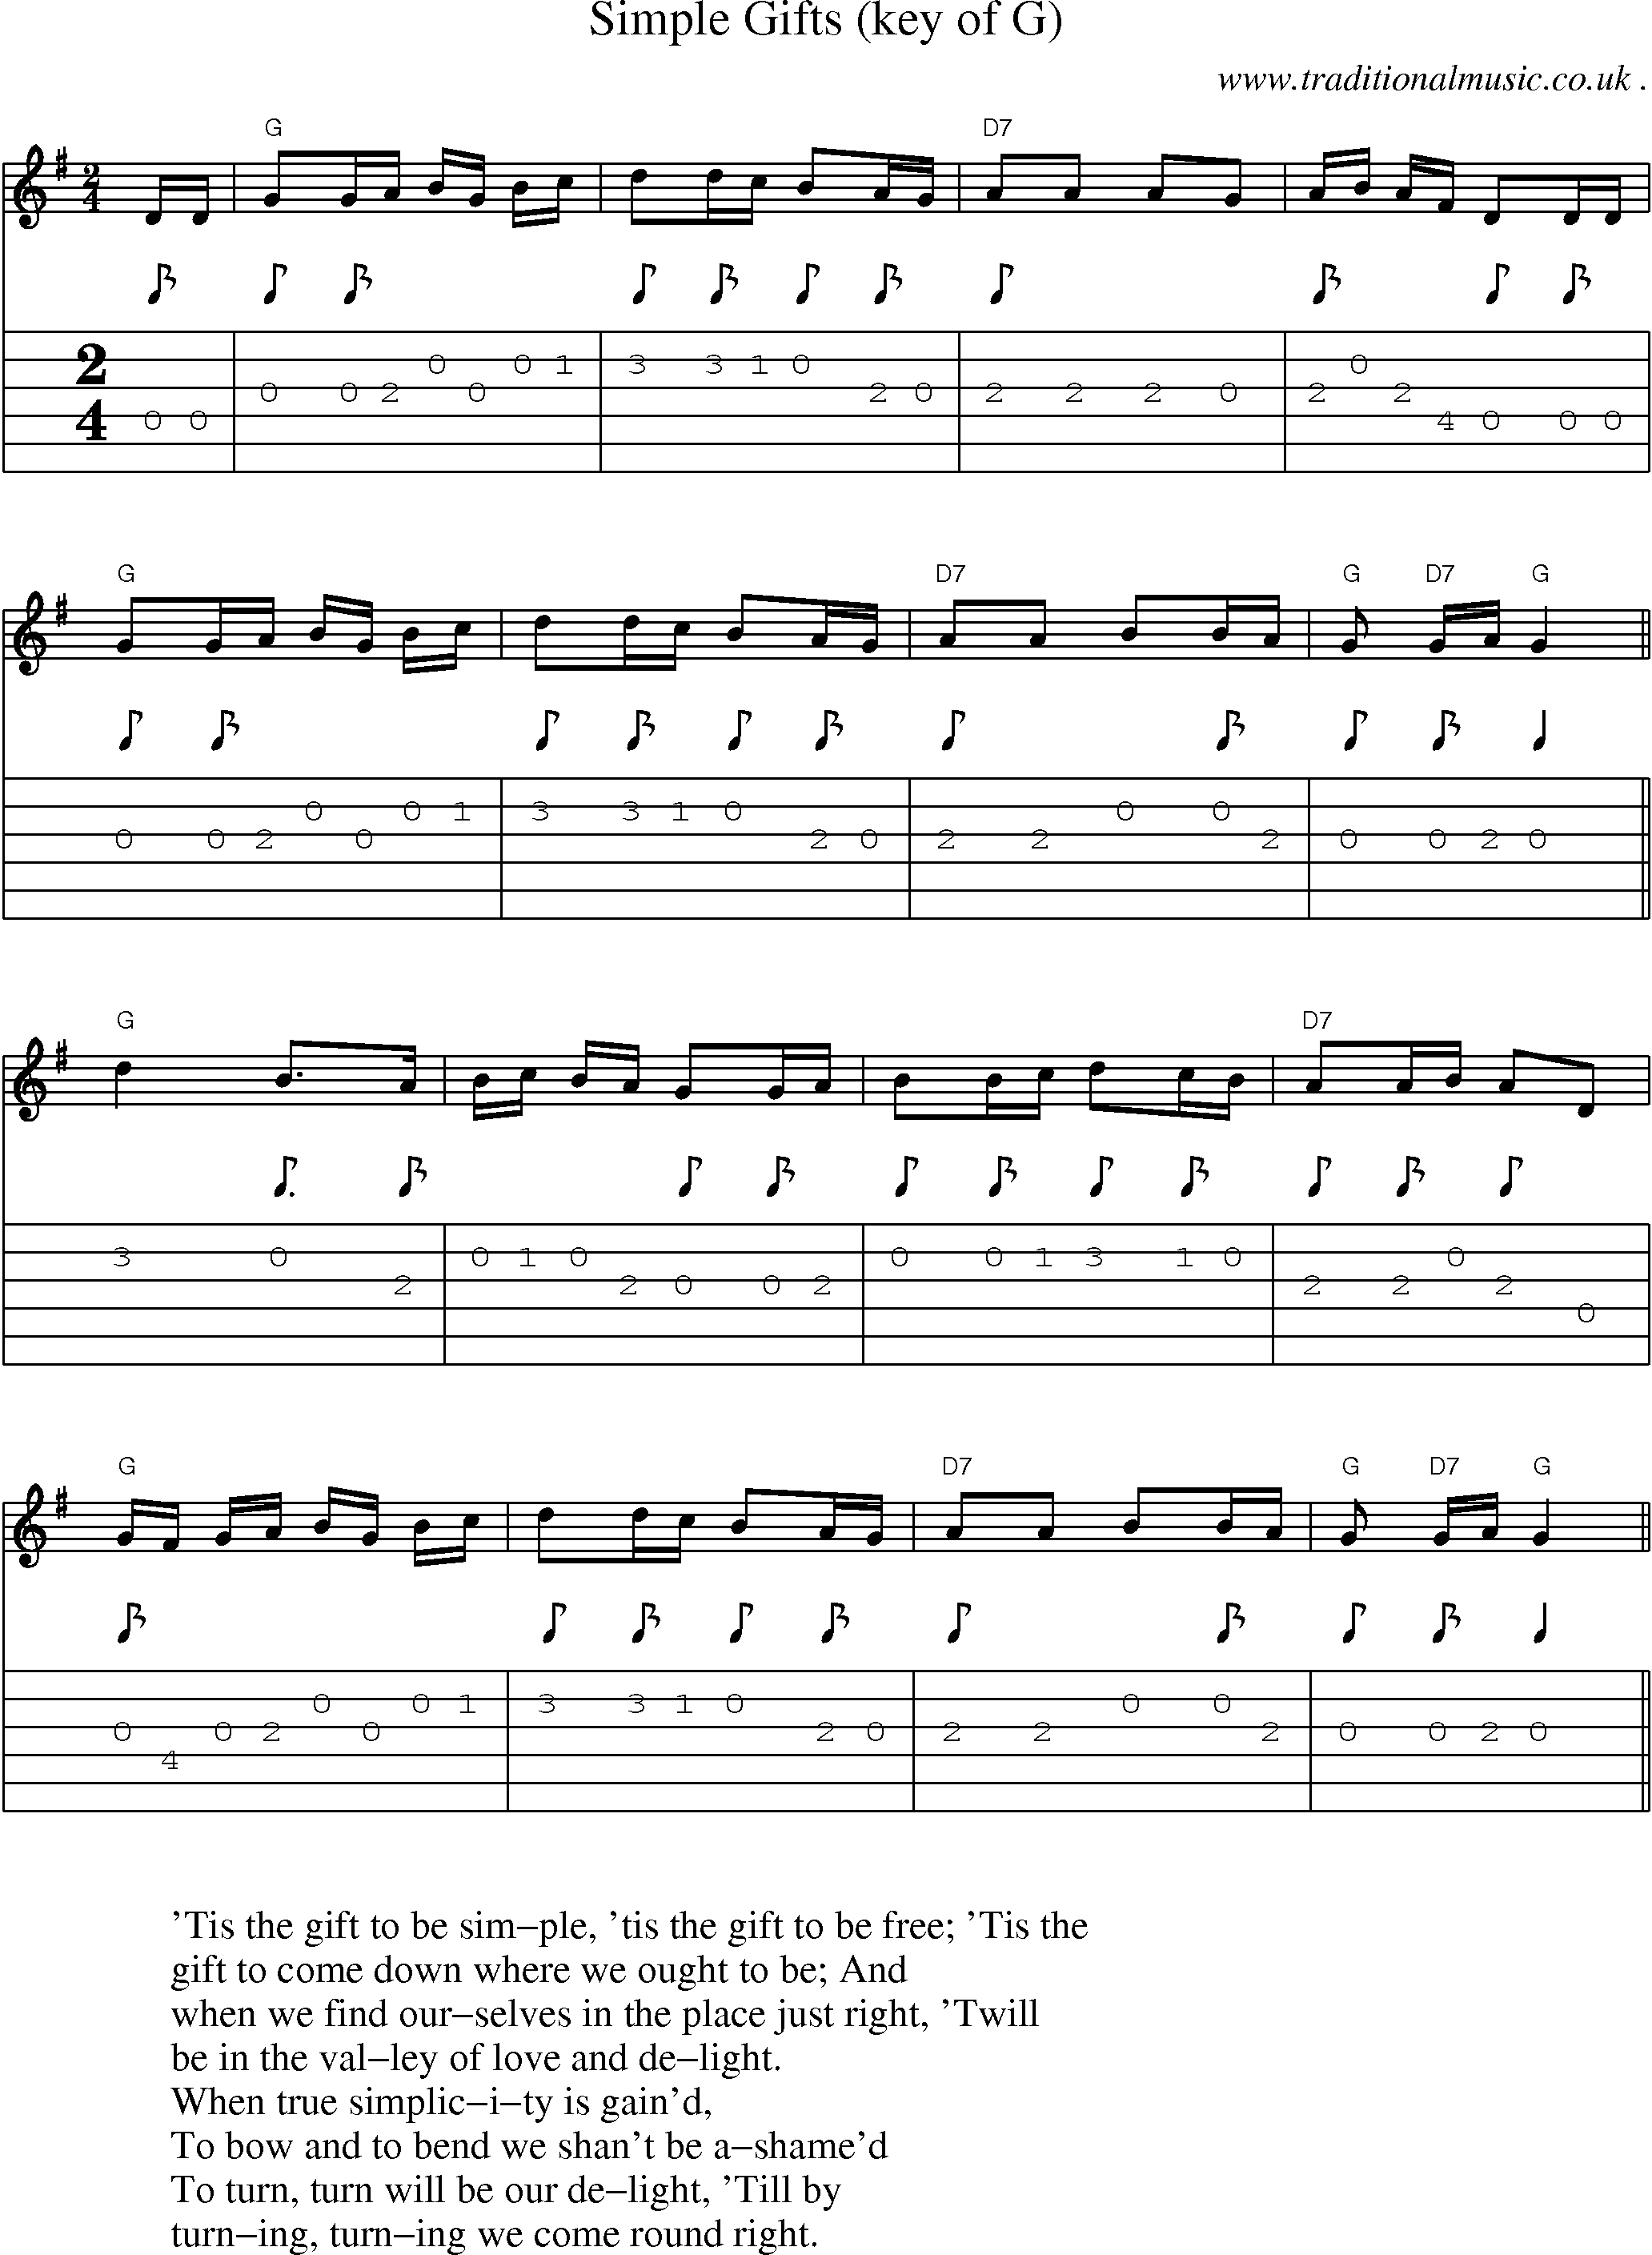 Music Score and Guitar Tabs for Simple Gifts (keyG)